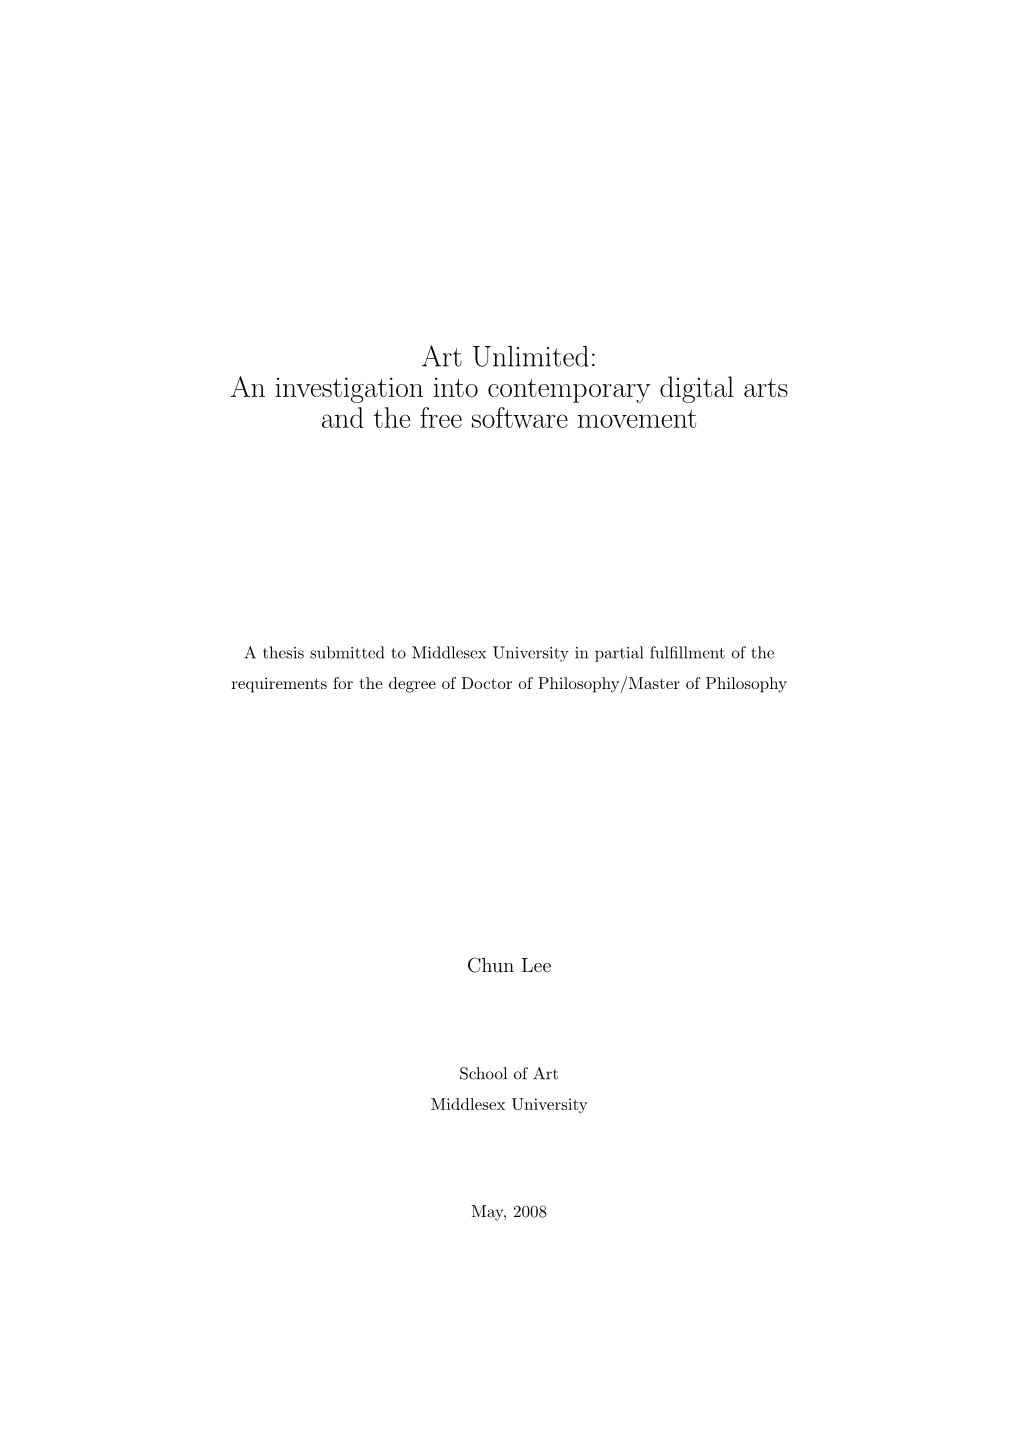 Art Unlimited: an Investigation Into Contemporary Digital Arts and the Free Software Movement